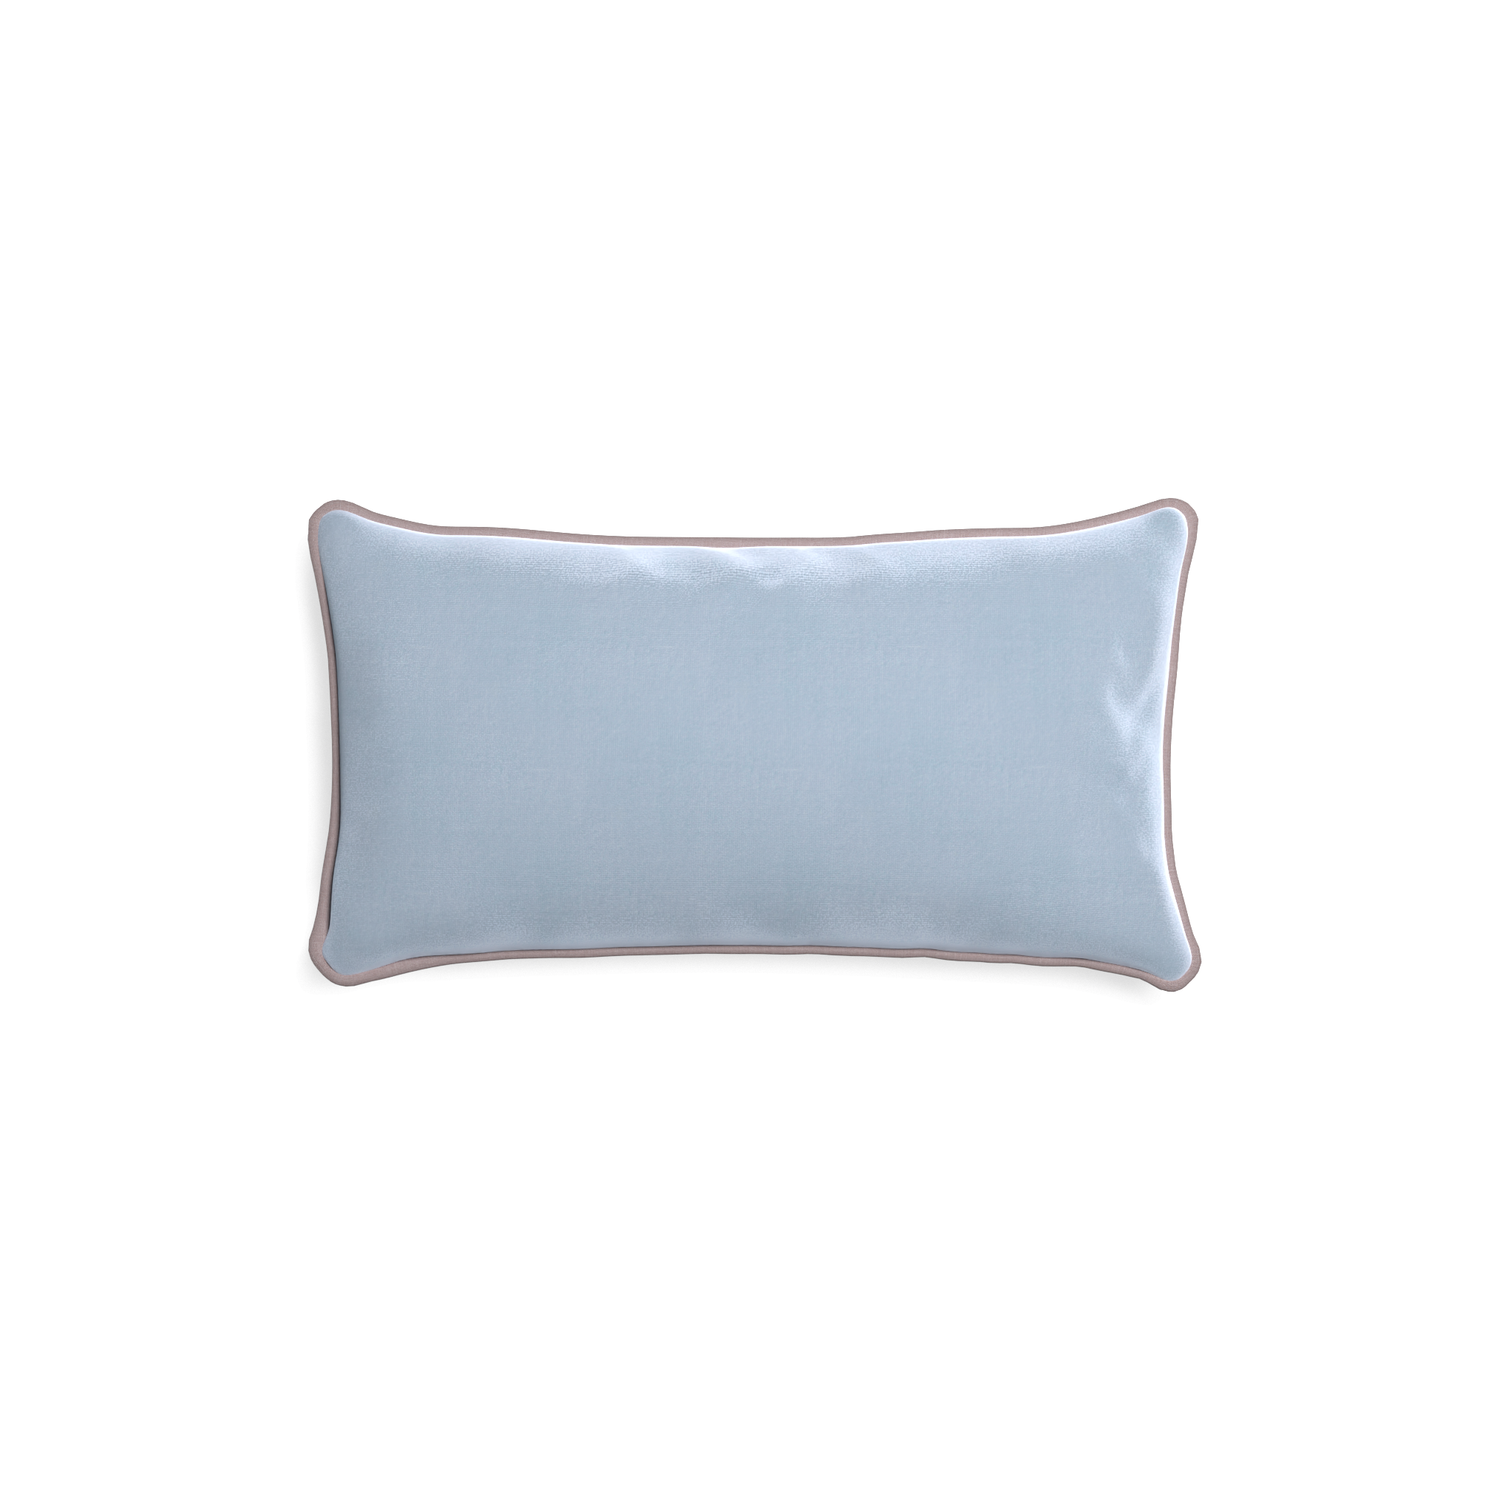 Petite-lumbar sky velvet custom skypillow with orchid piping on white background